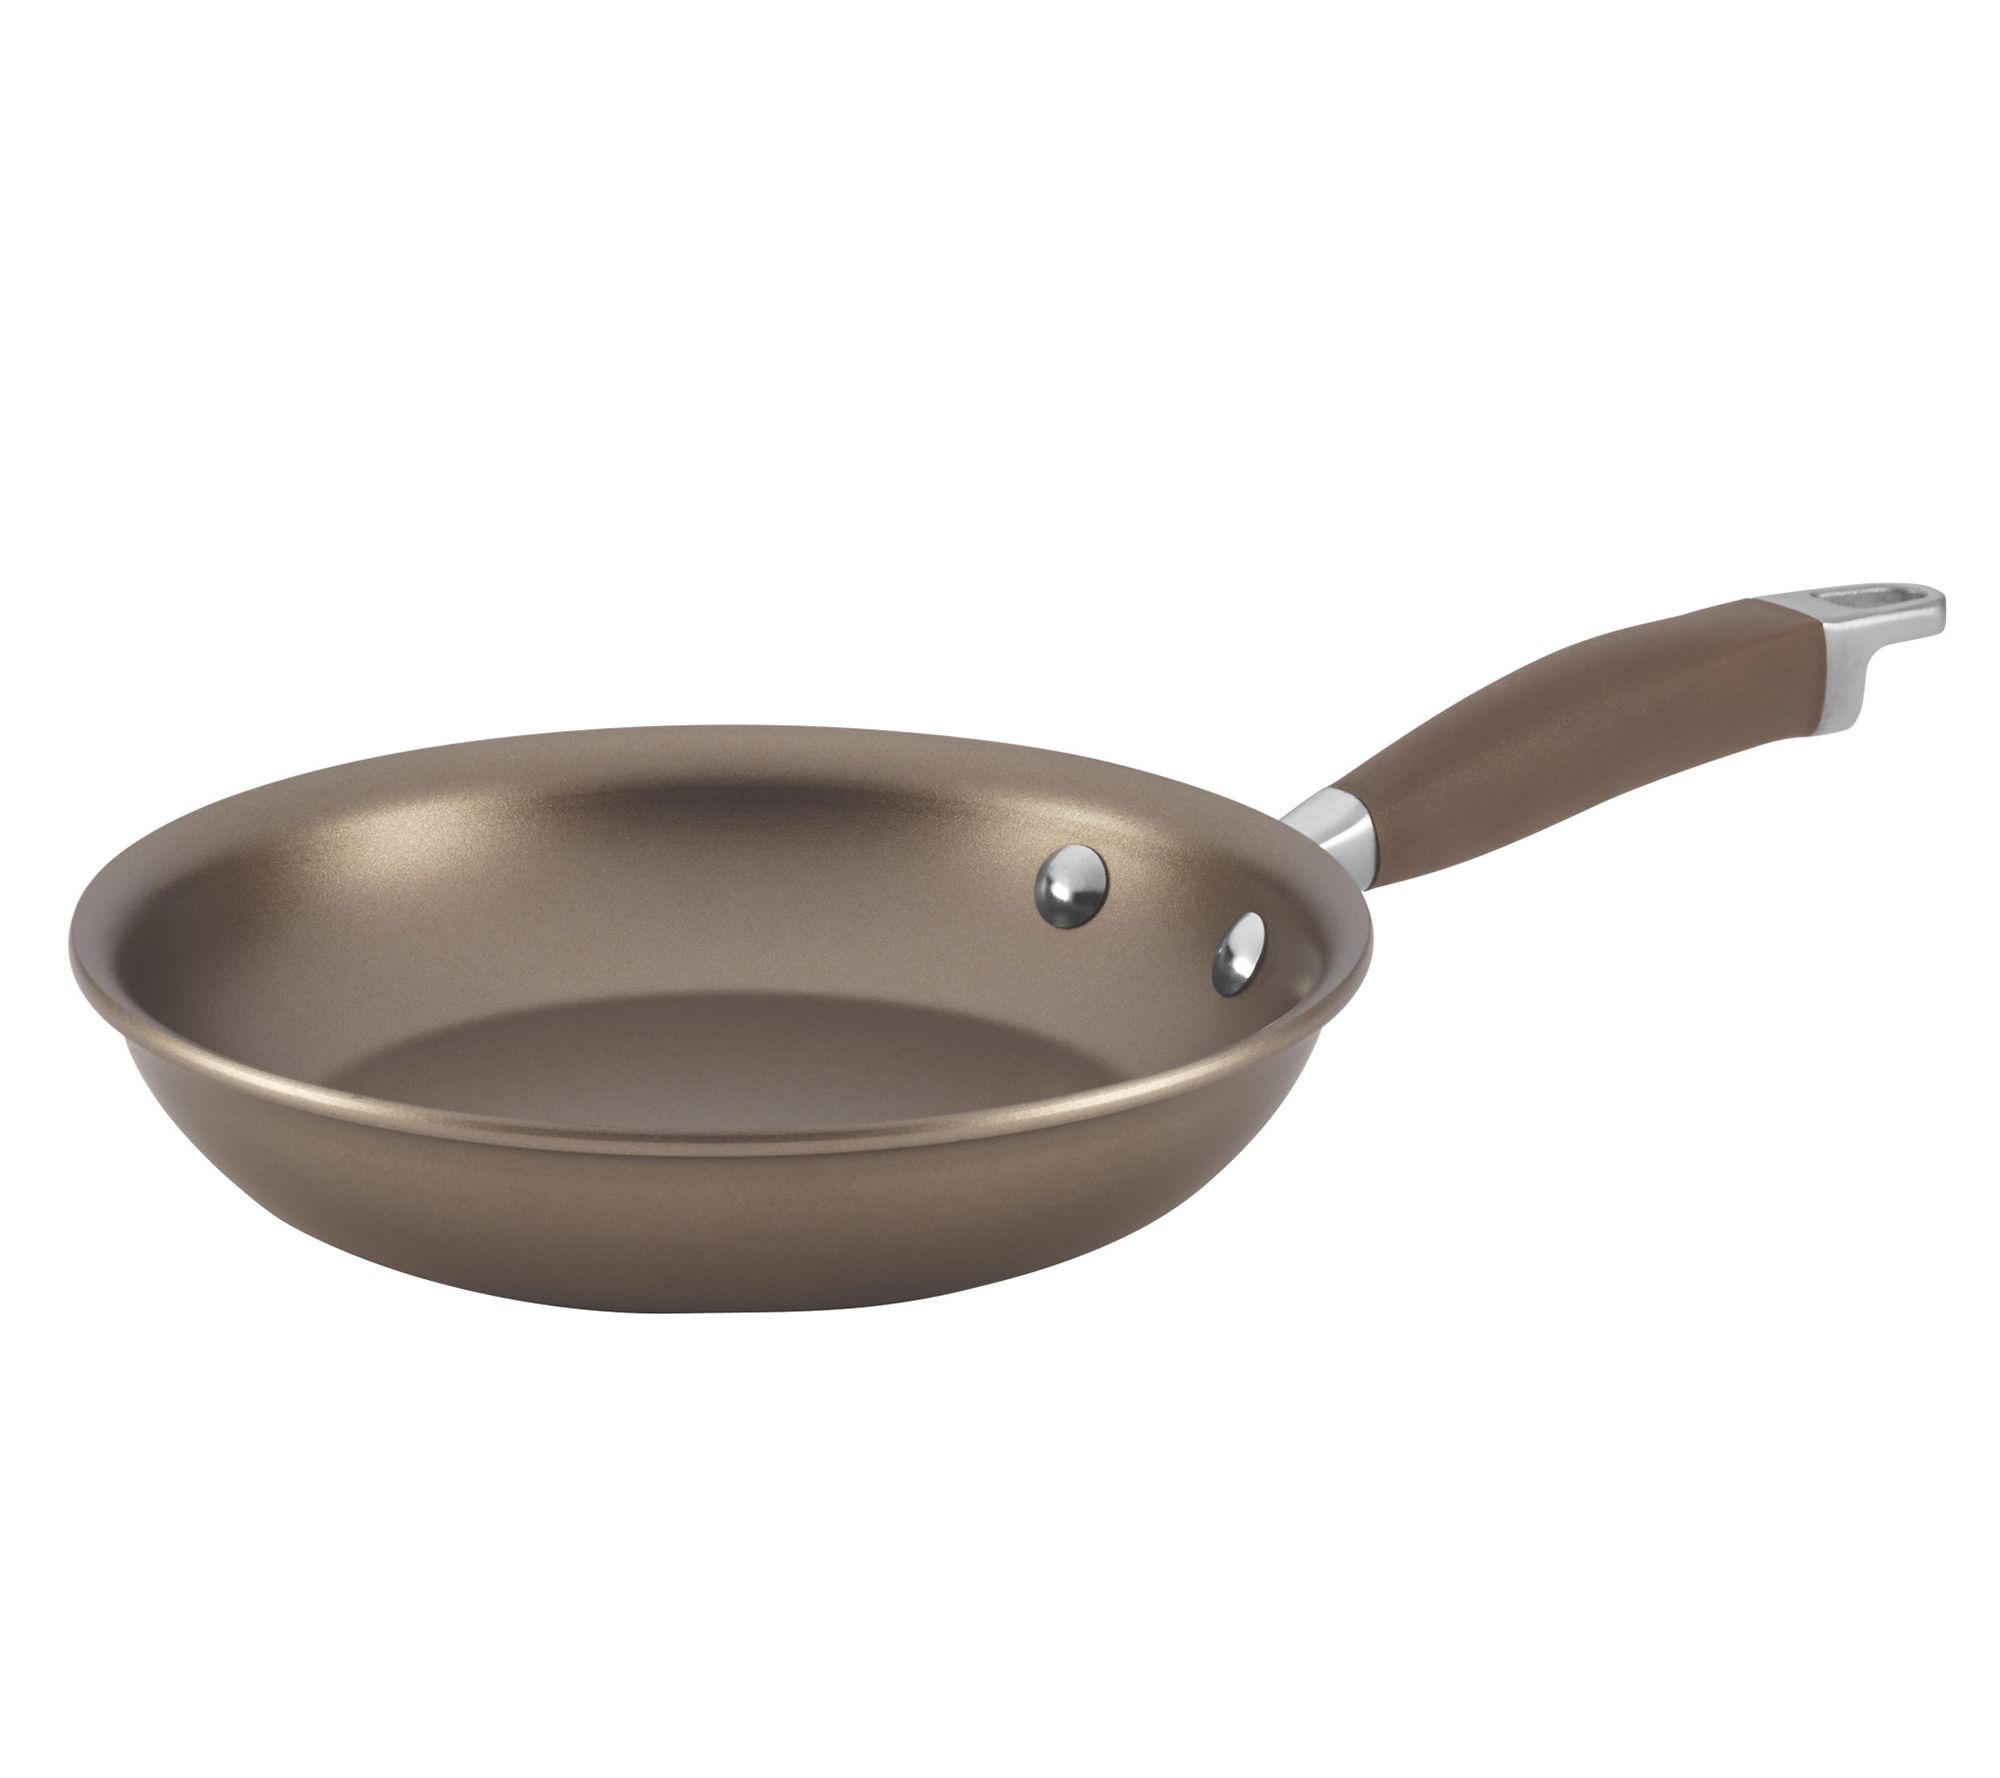 Anolon Advanced Hard Anodized Nonstick 10 In. And 12 In. French Skillet  Twin Pack, Fry Pans & Skillets, Household